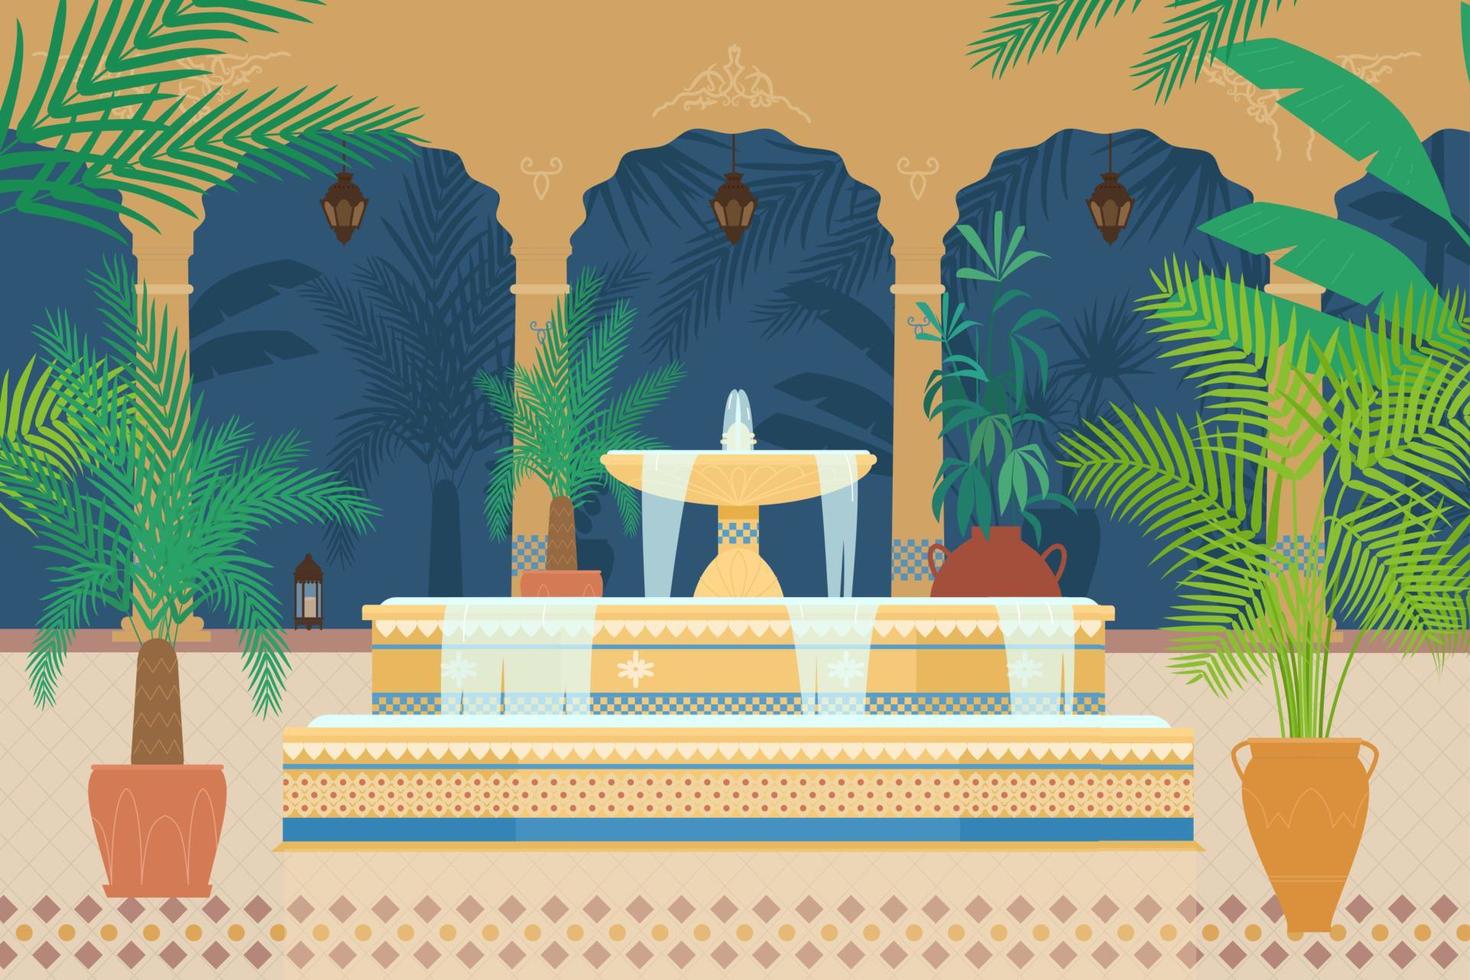 Flat Vector Illustration Of Arabian Palace Garden With Fountain, Tropical Plants, Archs, Lanterns.